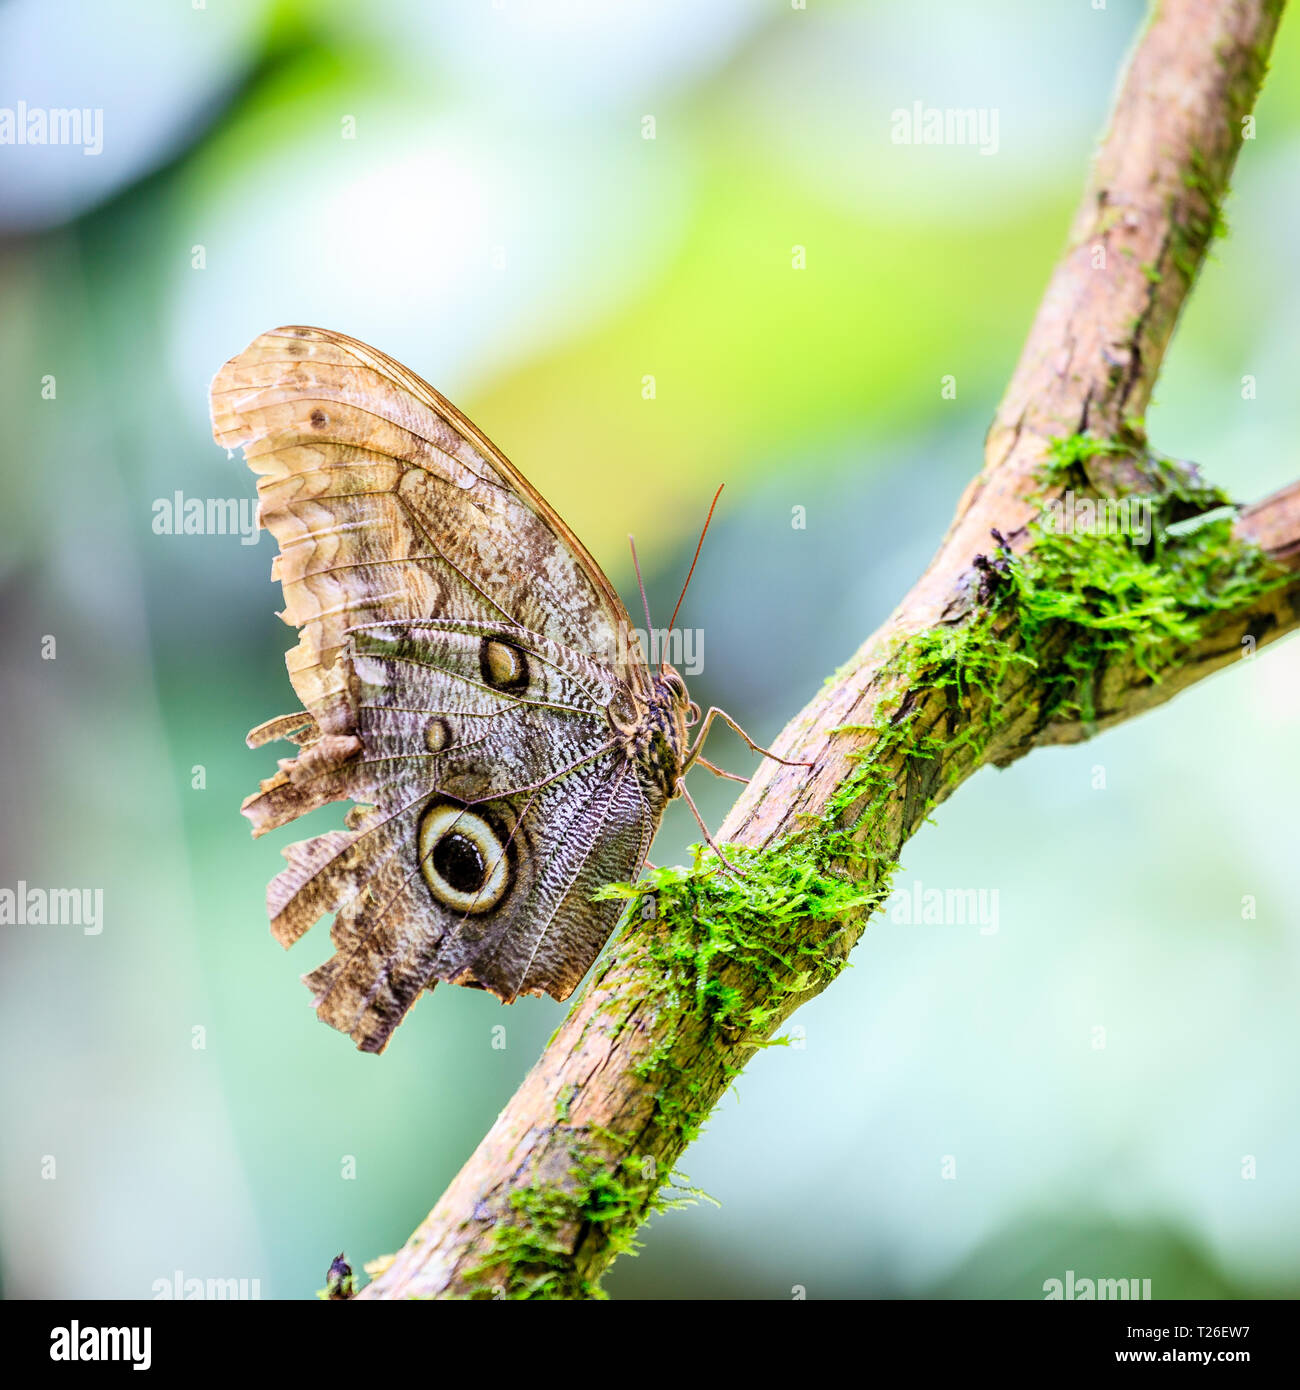 Close-up image of Owl butterfly in a rainforest in Costa Rica Stock Photo